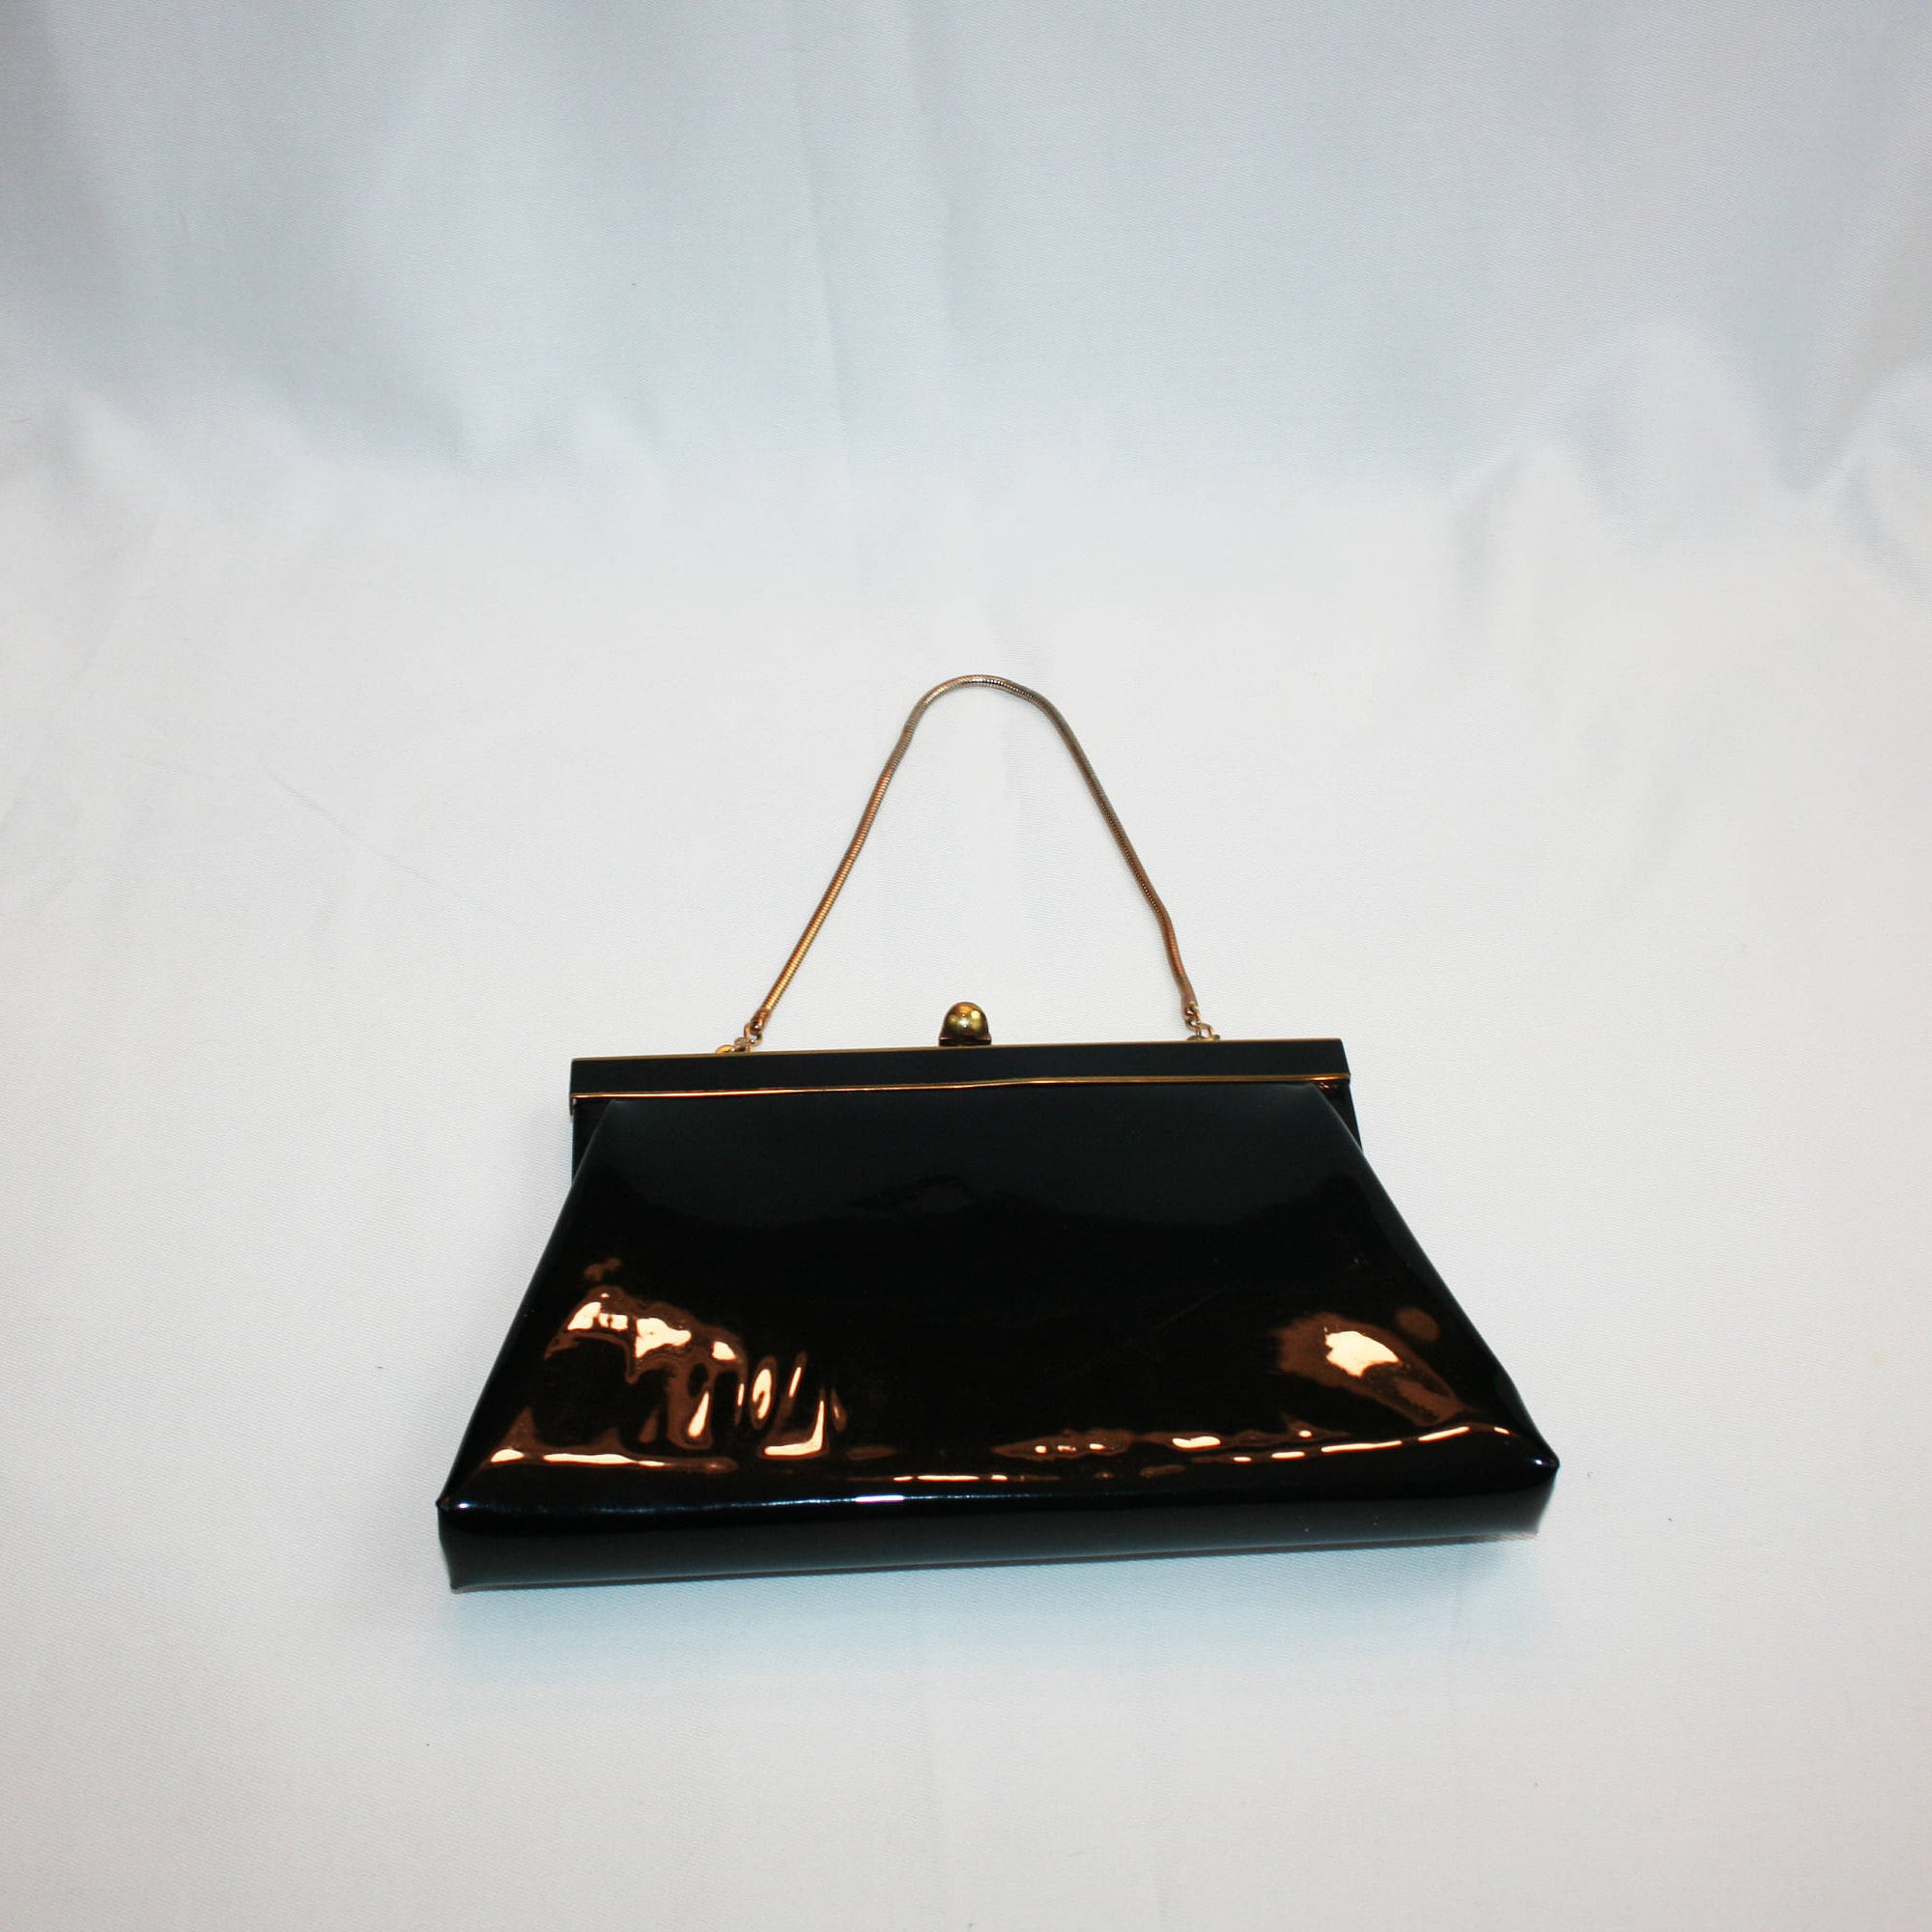 Vintage 1960s Black Patent Leather and Lucite MOD Purse - Raleigh